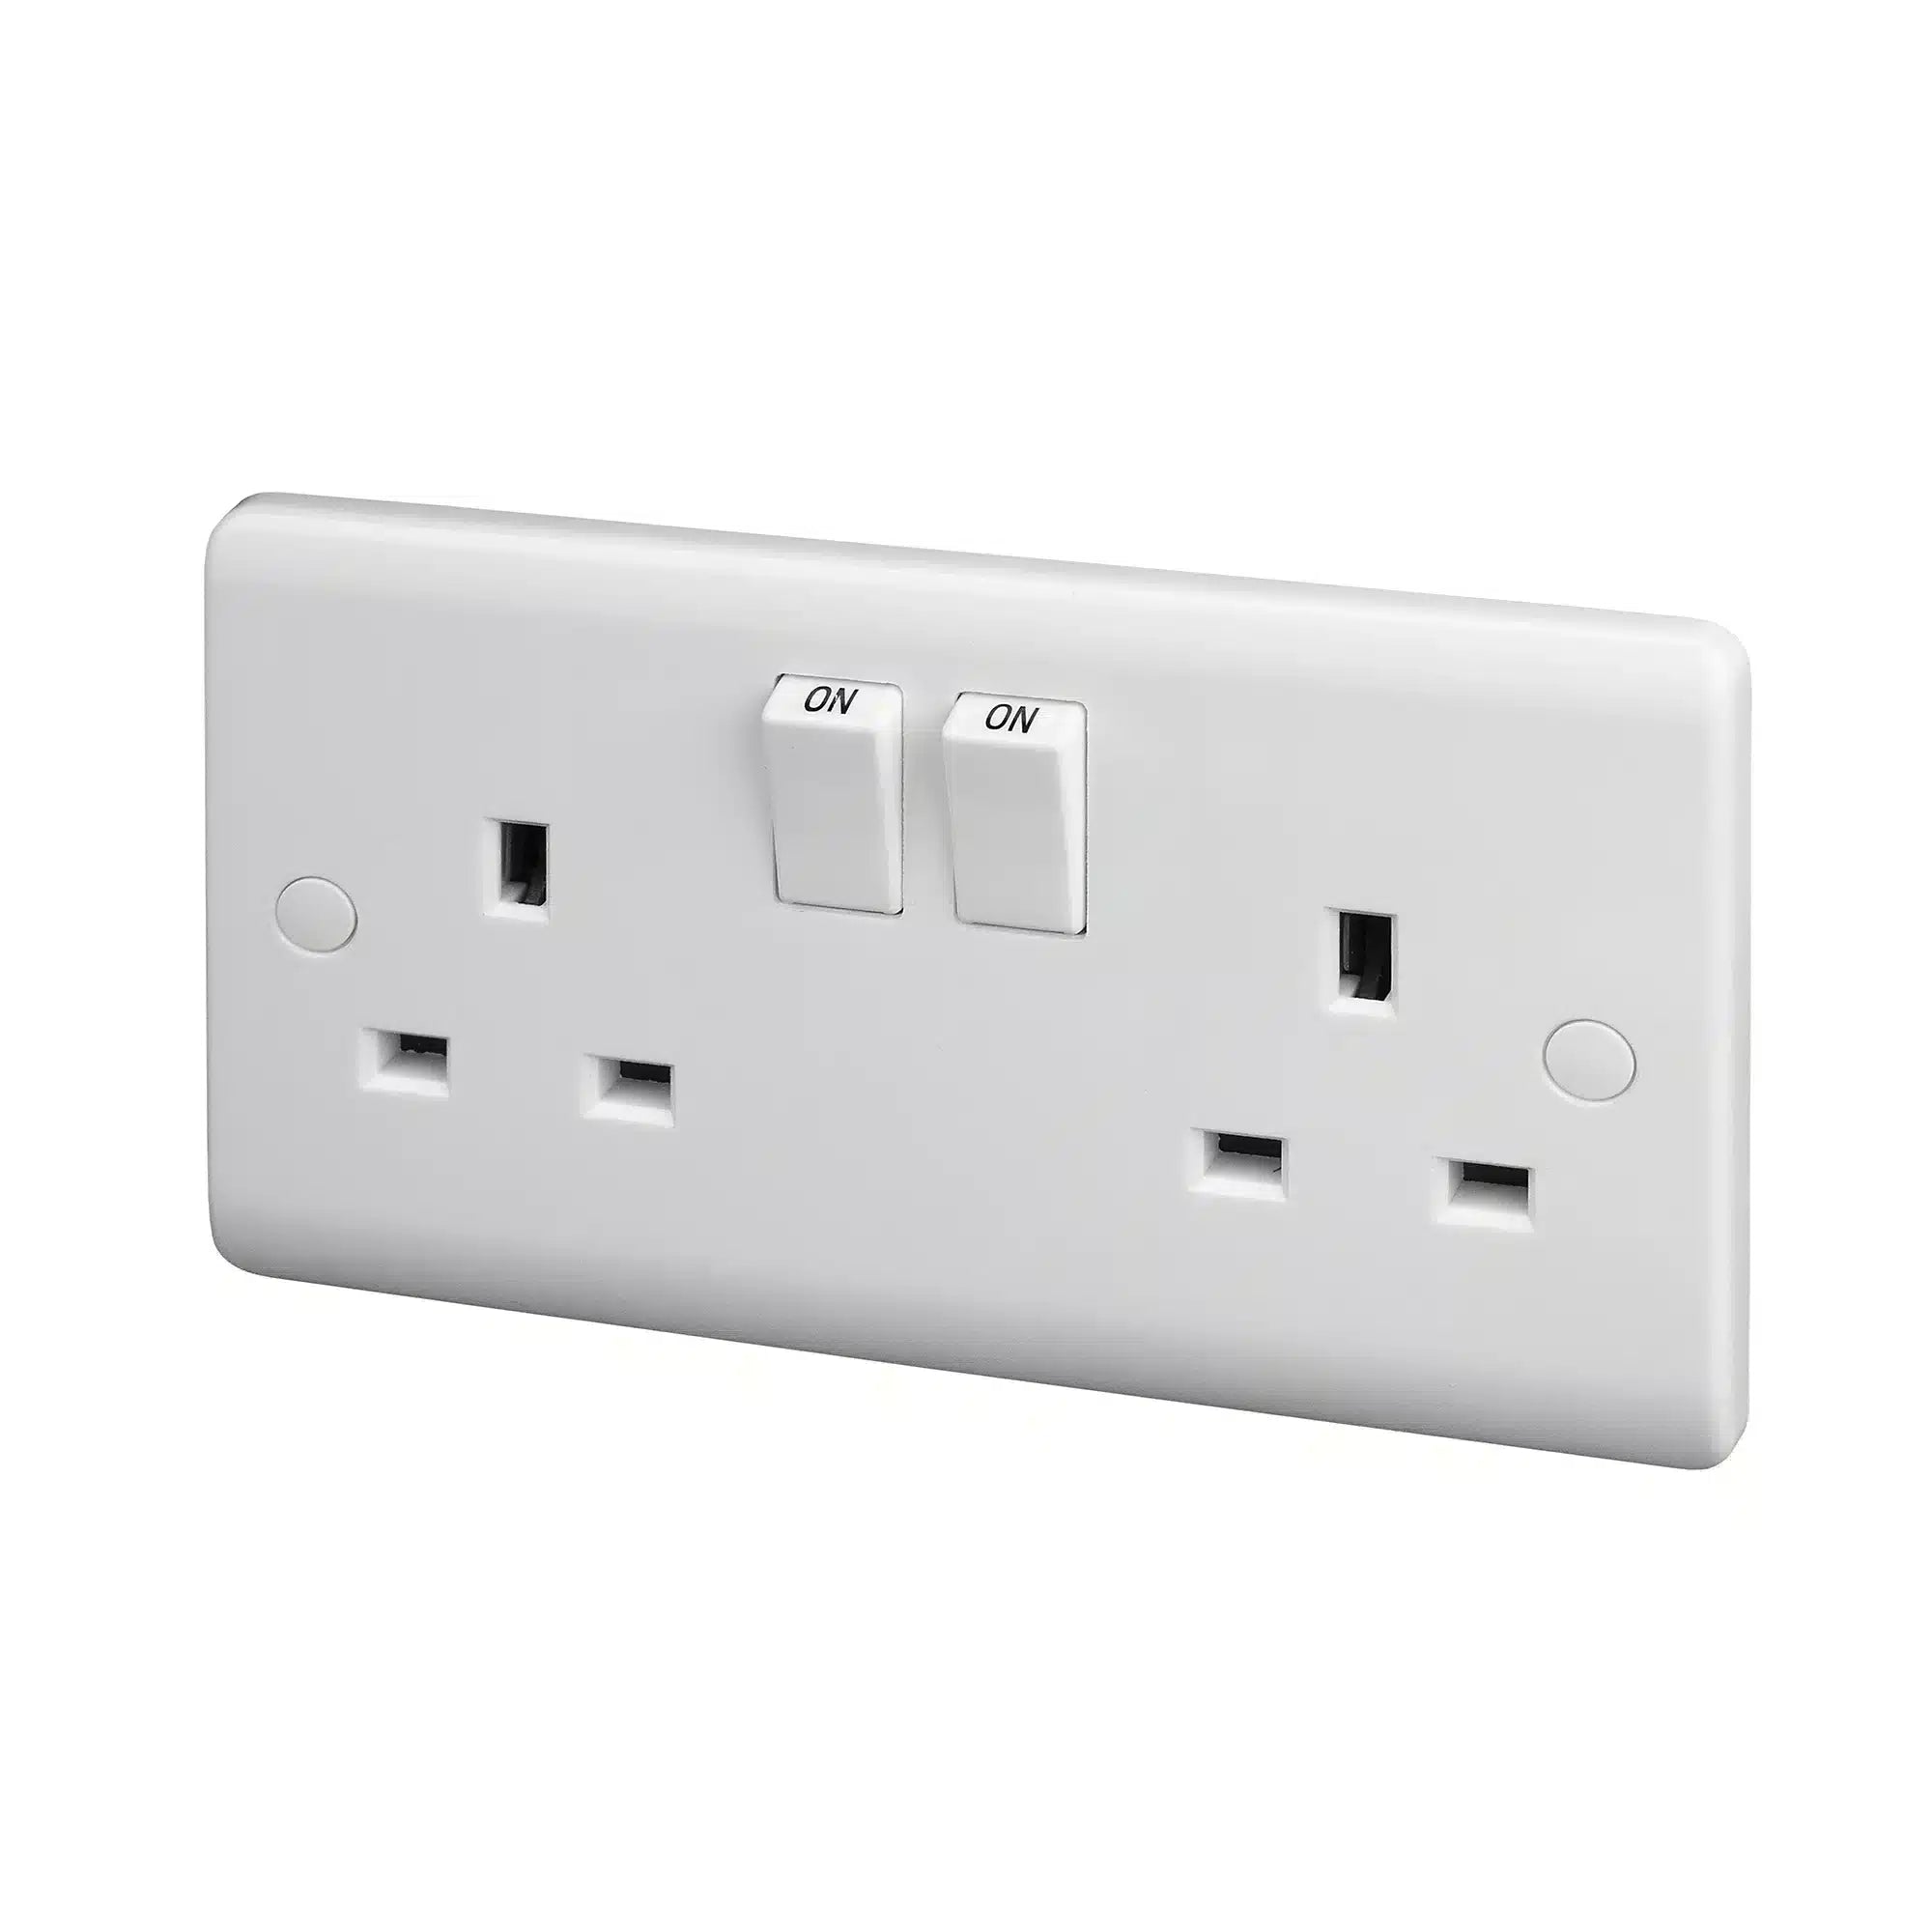 LAP White Double 13A Switched Socket with White inserts 1201